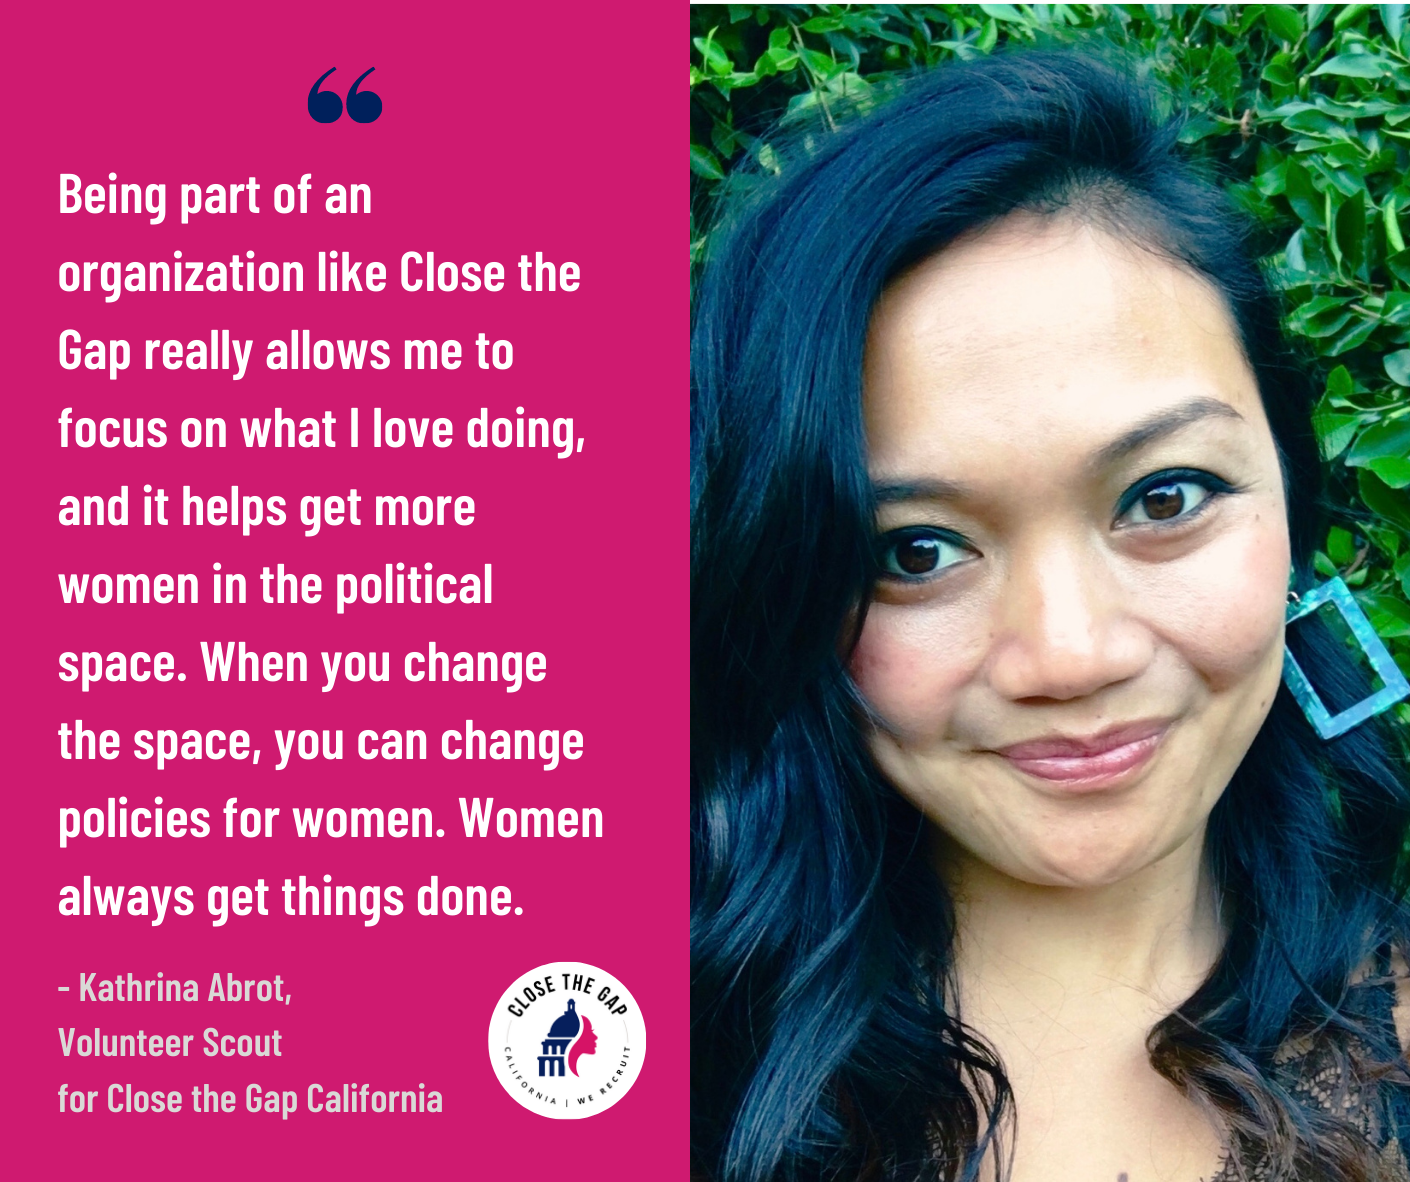 ''Being part of an organization like Close the Gap really allows me to focus on what I love doing, and it helps get more women in the political space. When you change the space, you can change policies for women. Women always get things done.''  - Volunteer Scout Kathrina Abrot